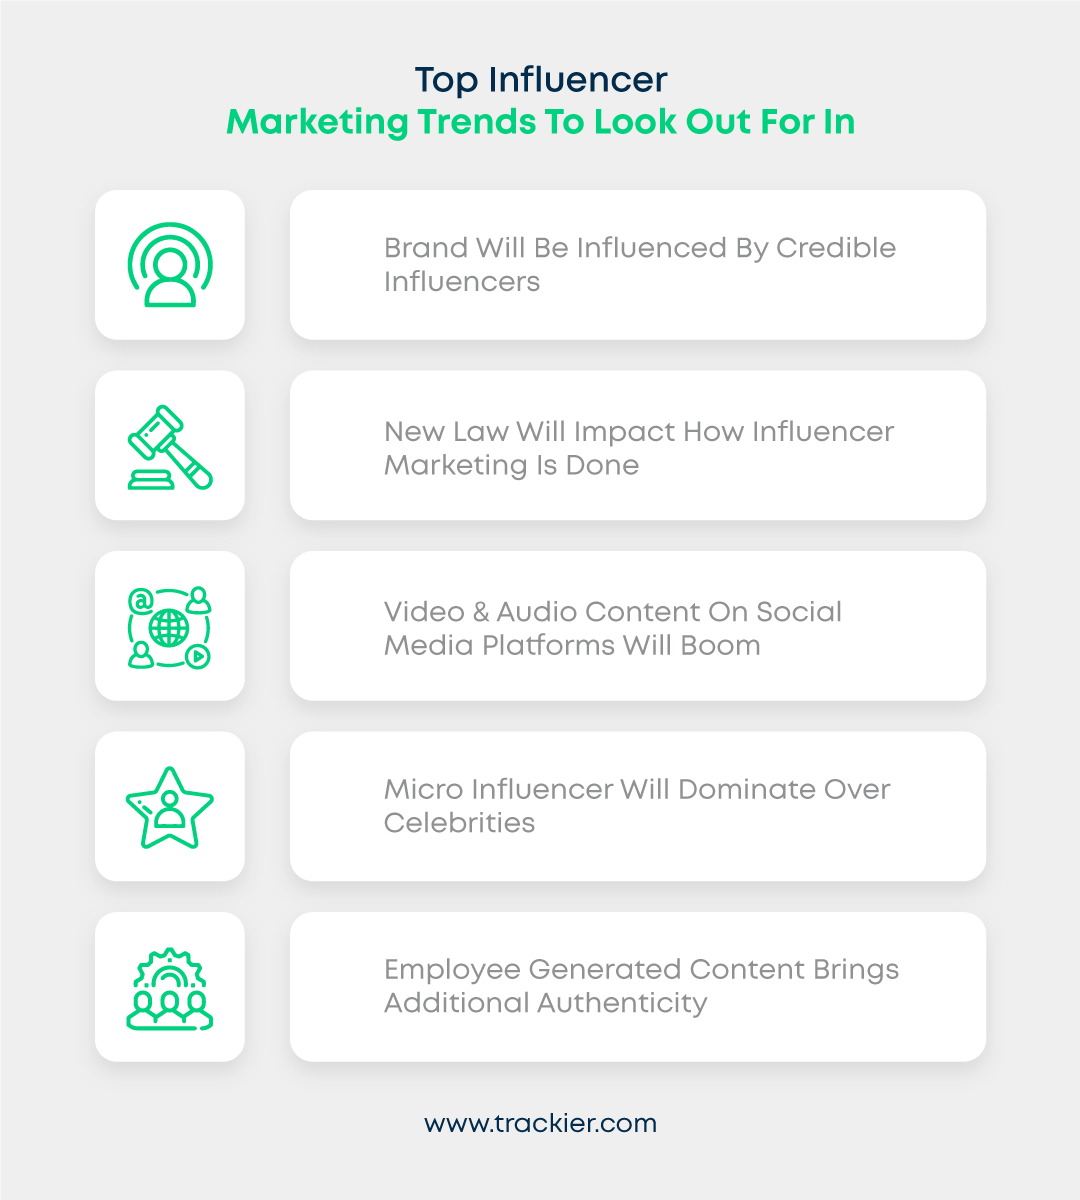 Top influencers marketing trends